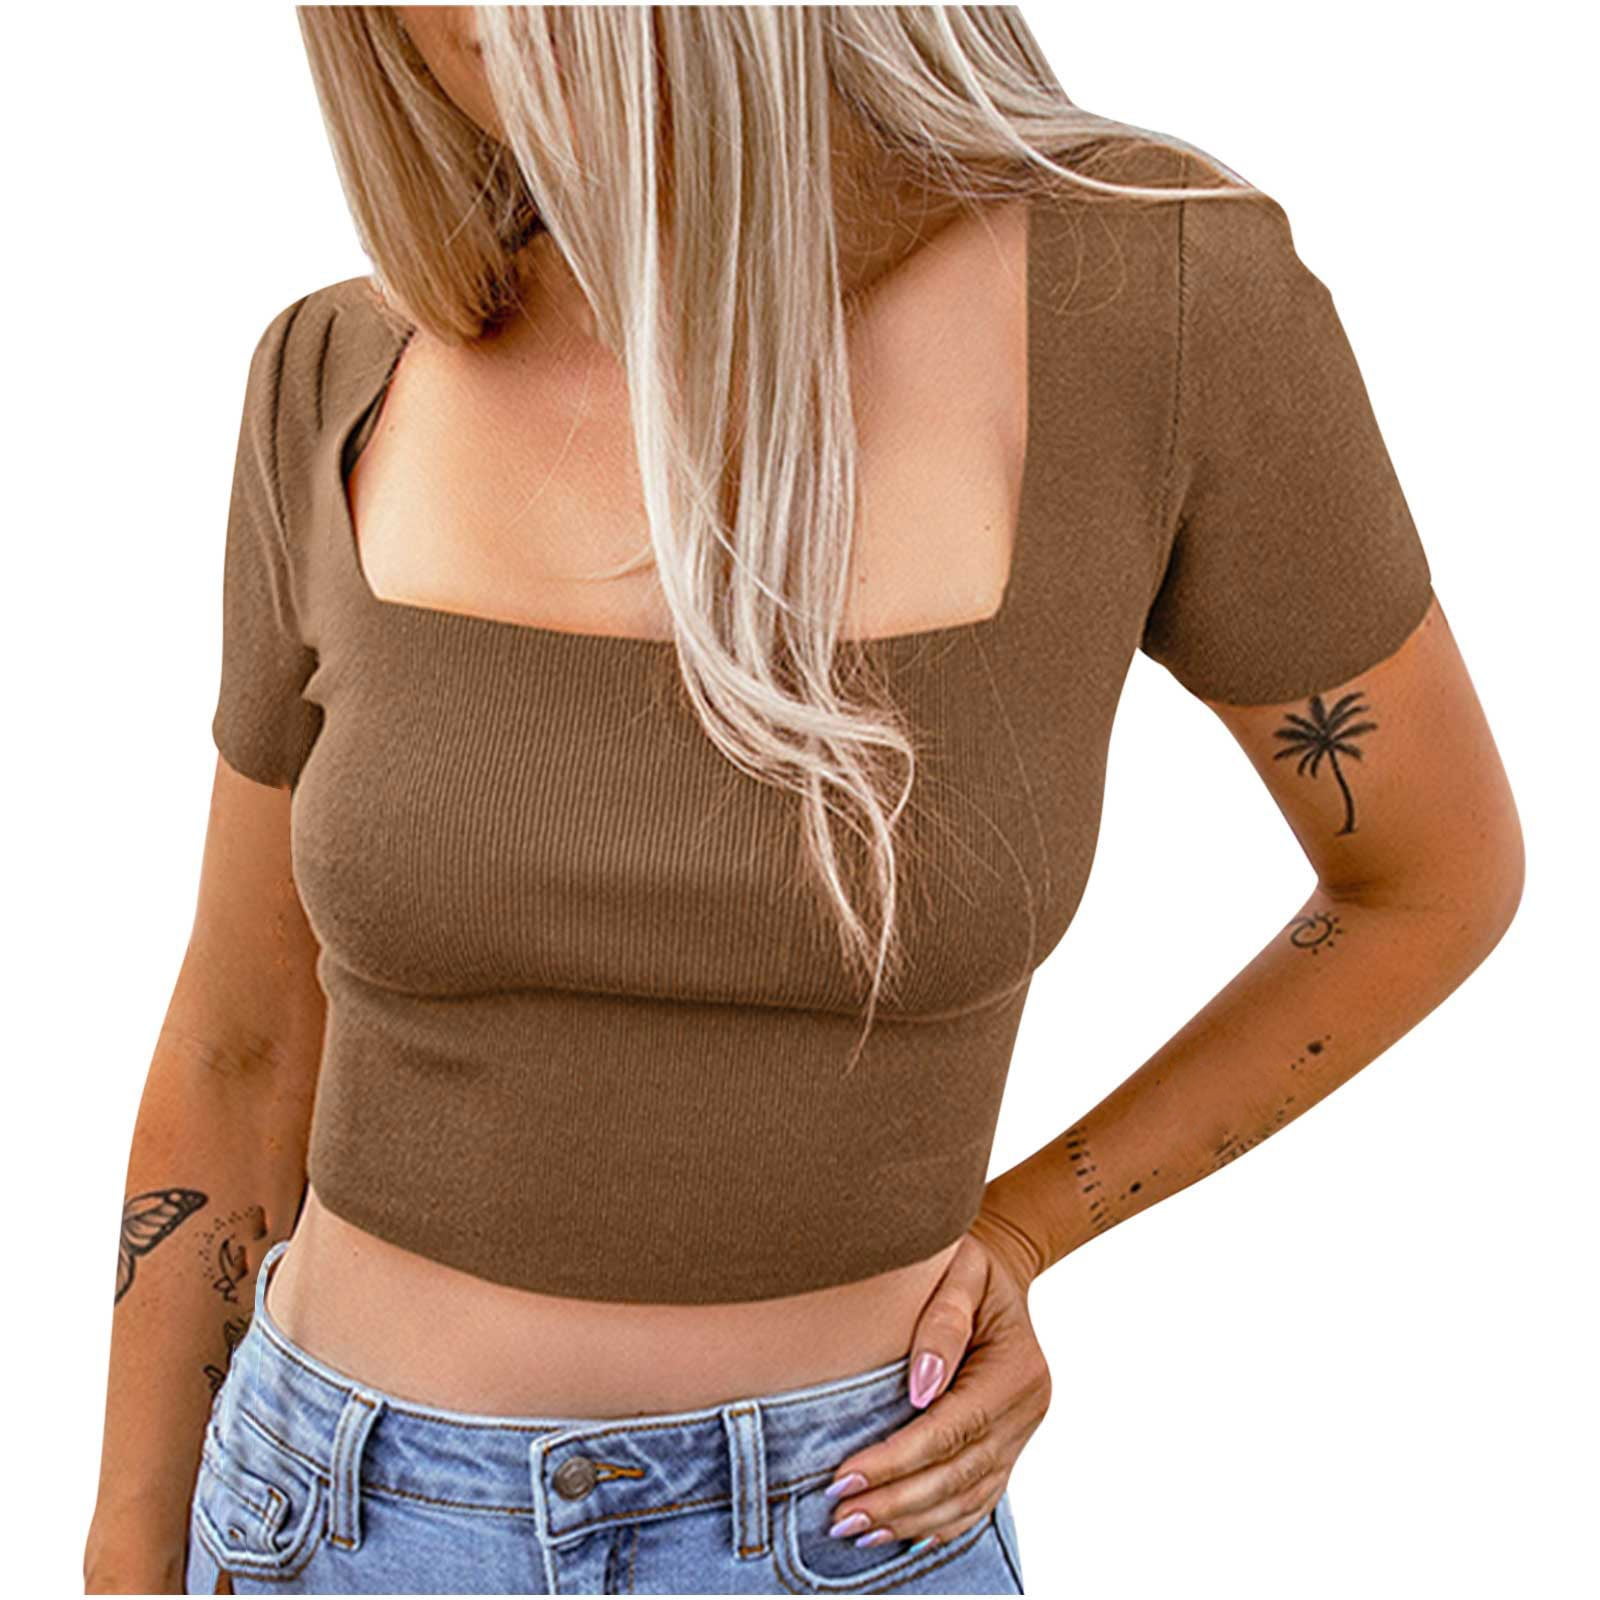 RYRJJ Women's Short Sleeve Crop Tops Square Neck Cropped T Shirts